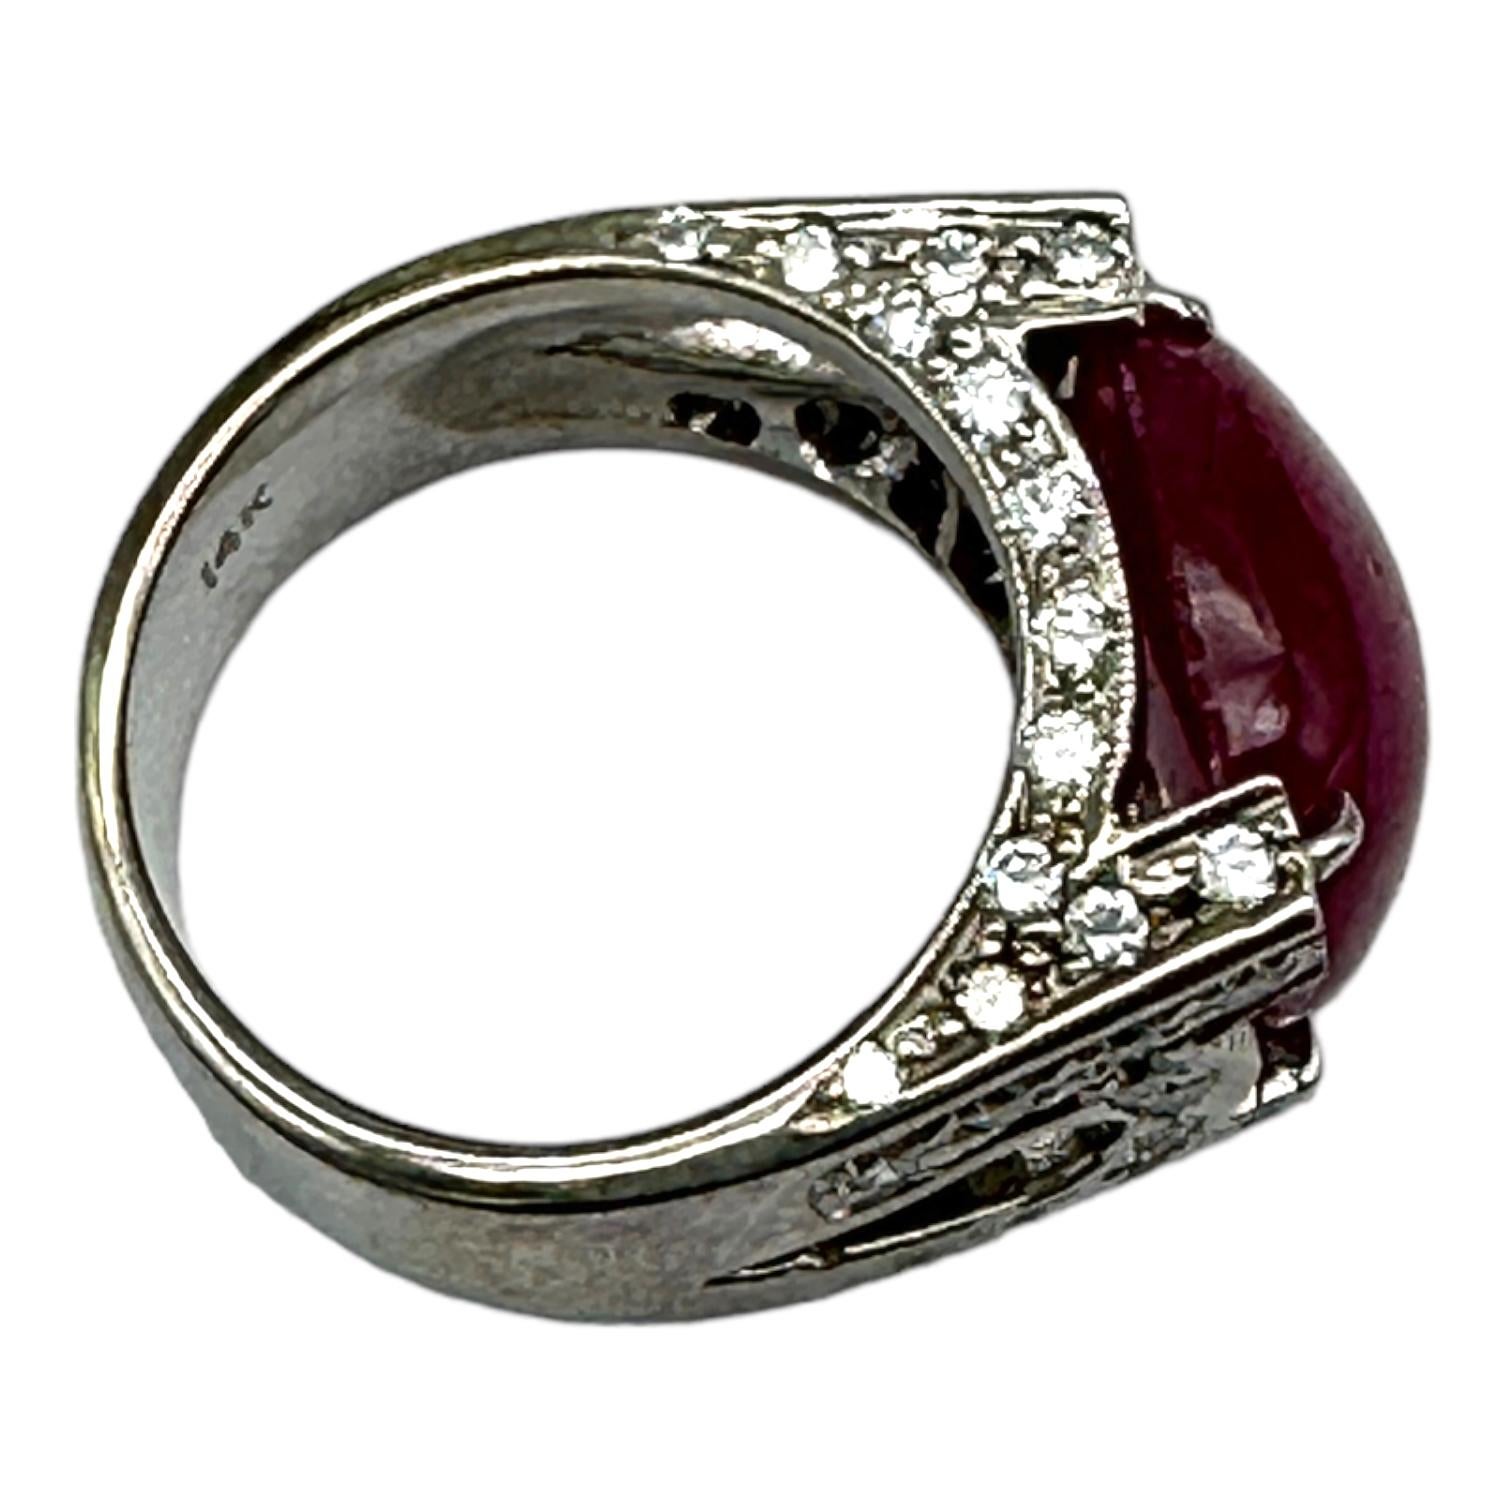  9 Carat Cabochon Ruby & Diamond Solitaire Ring 10.50 CTW In Good Condition For Sale In Laguna Hills, CA